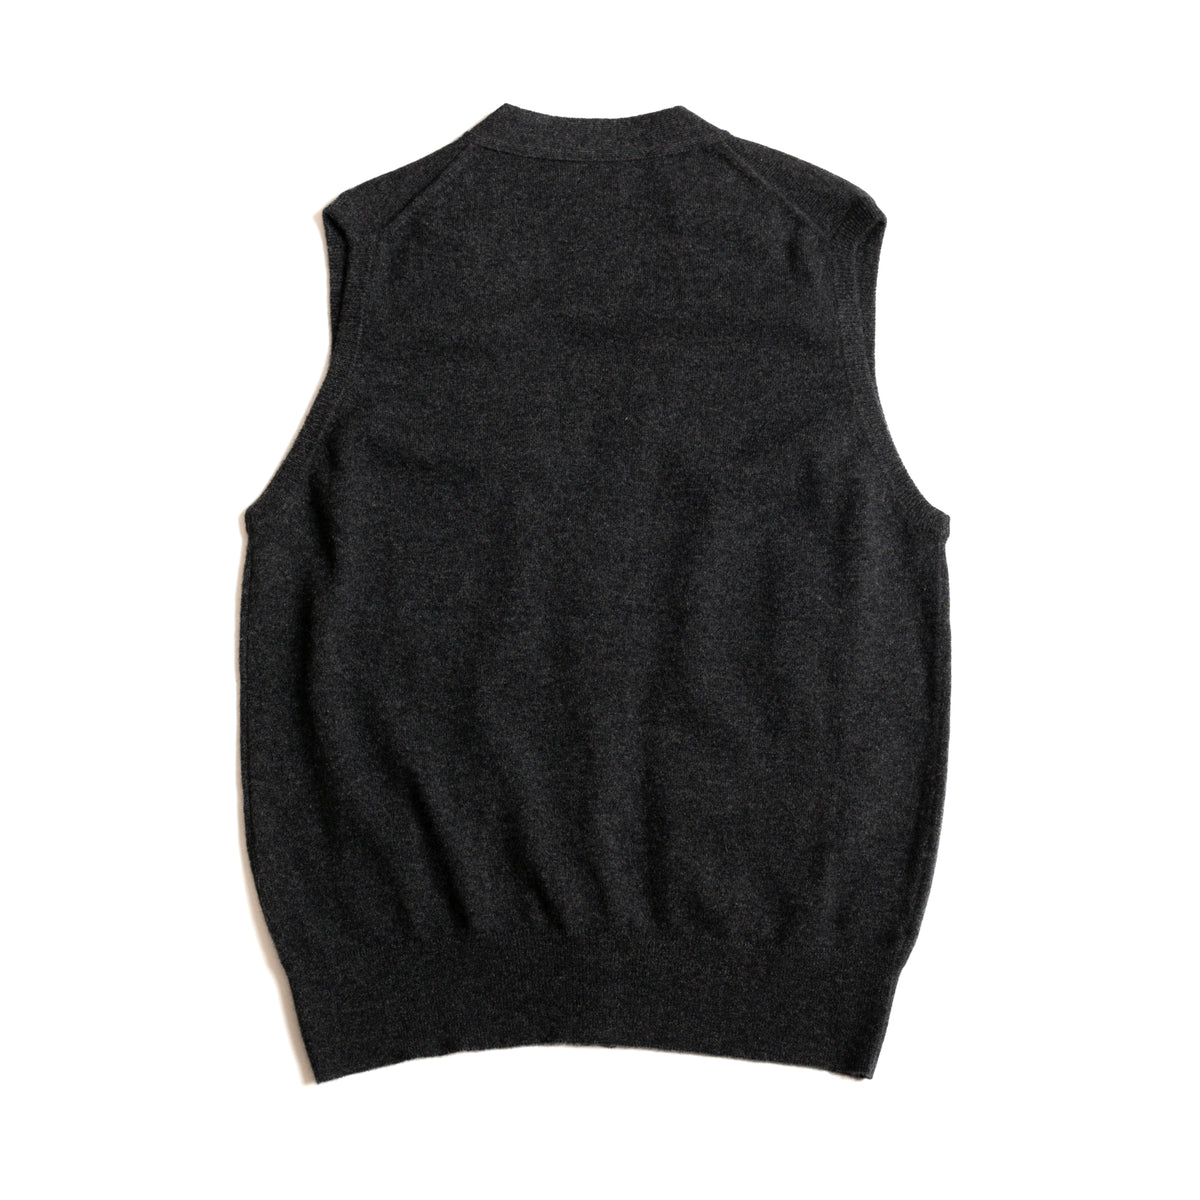 Charcoal Grey 1 Ply Cashmere Waistcoat